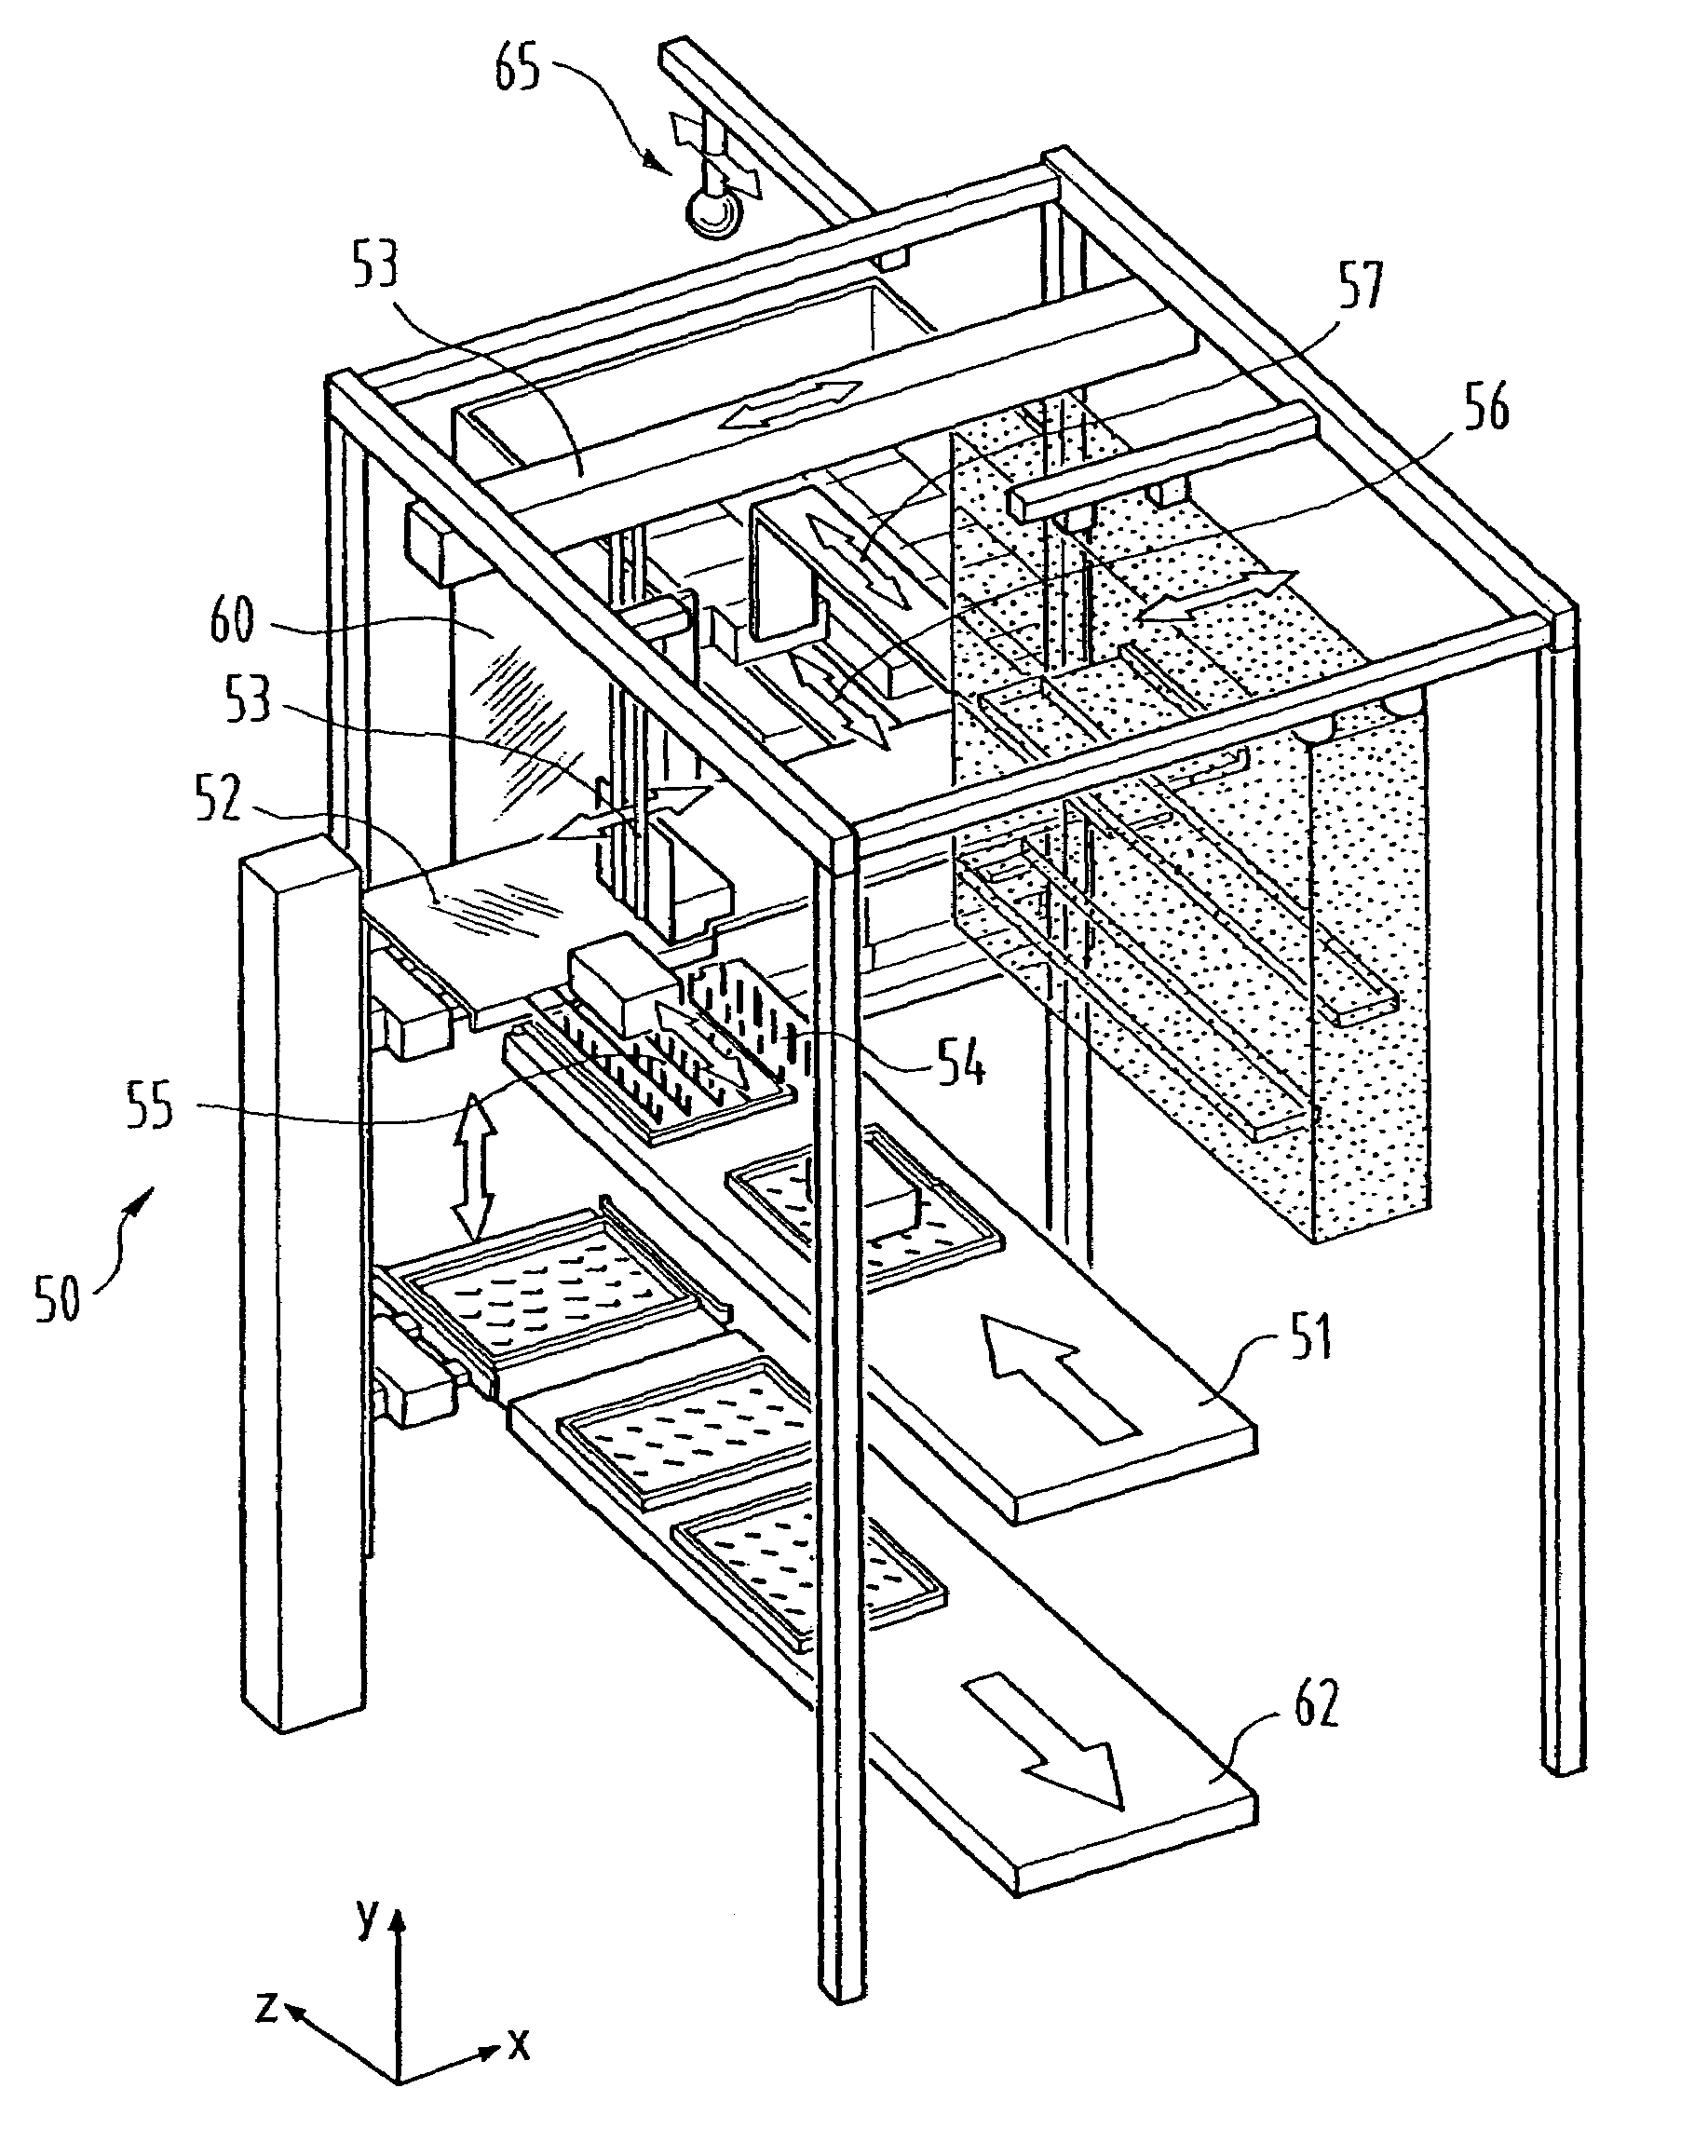 Apparatus for depositing a packing unit at a desired position on a load carrier